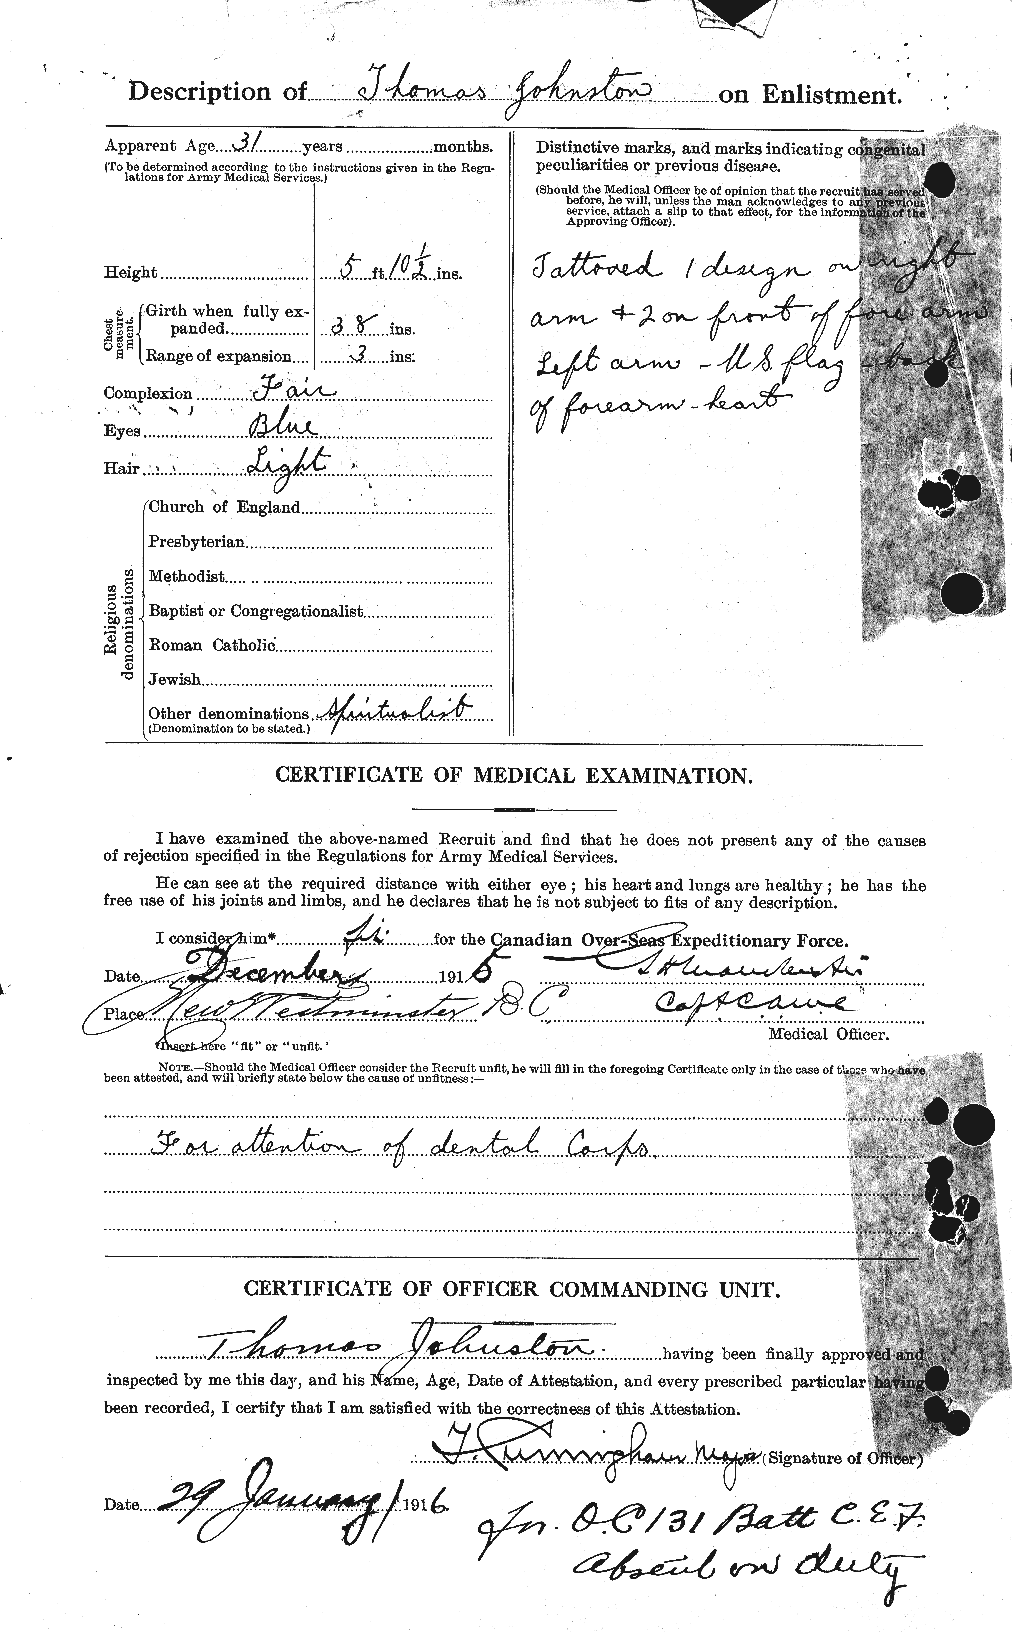 Personnel Records of the First World War - CEF 427125b